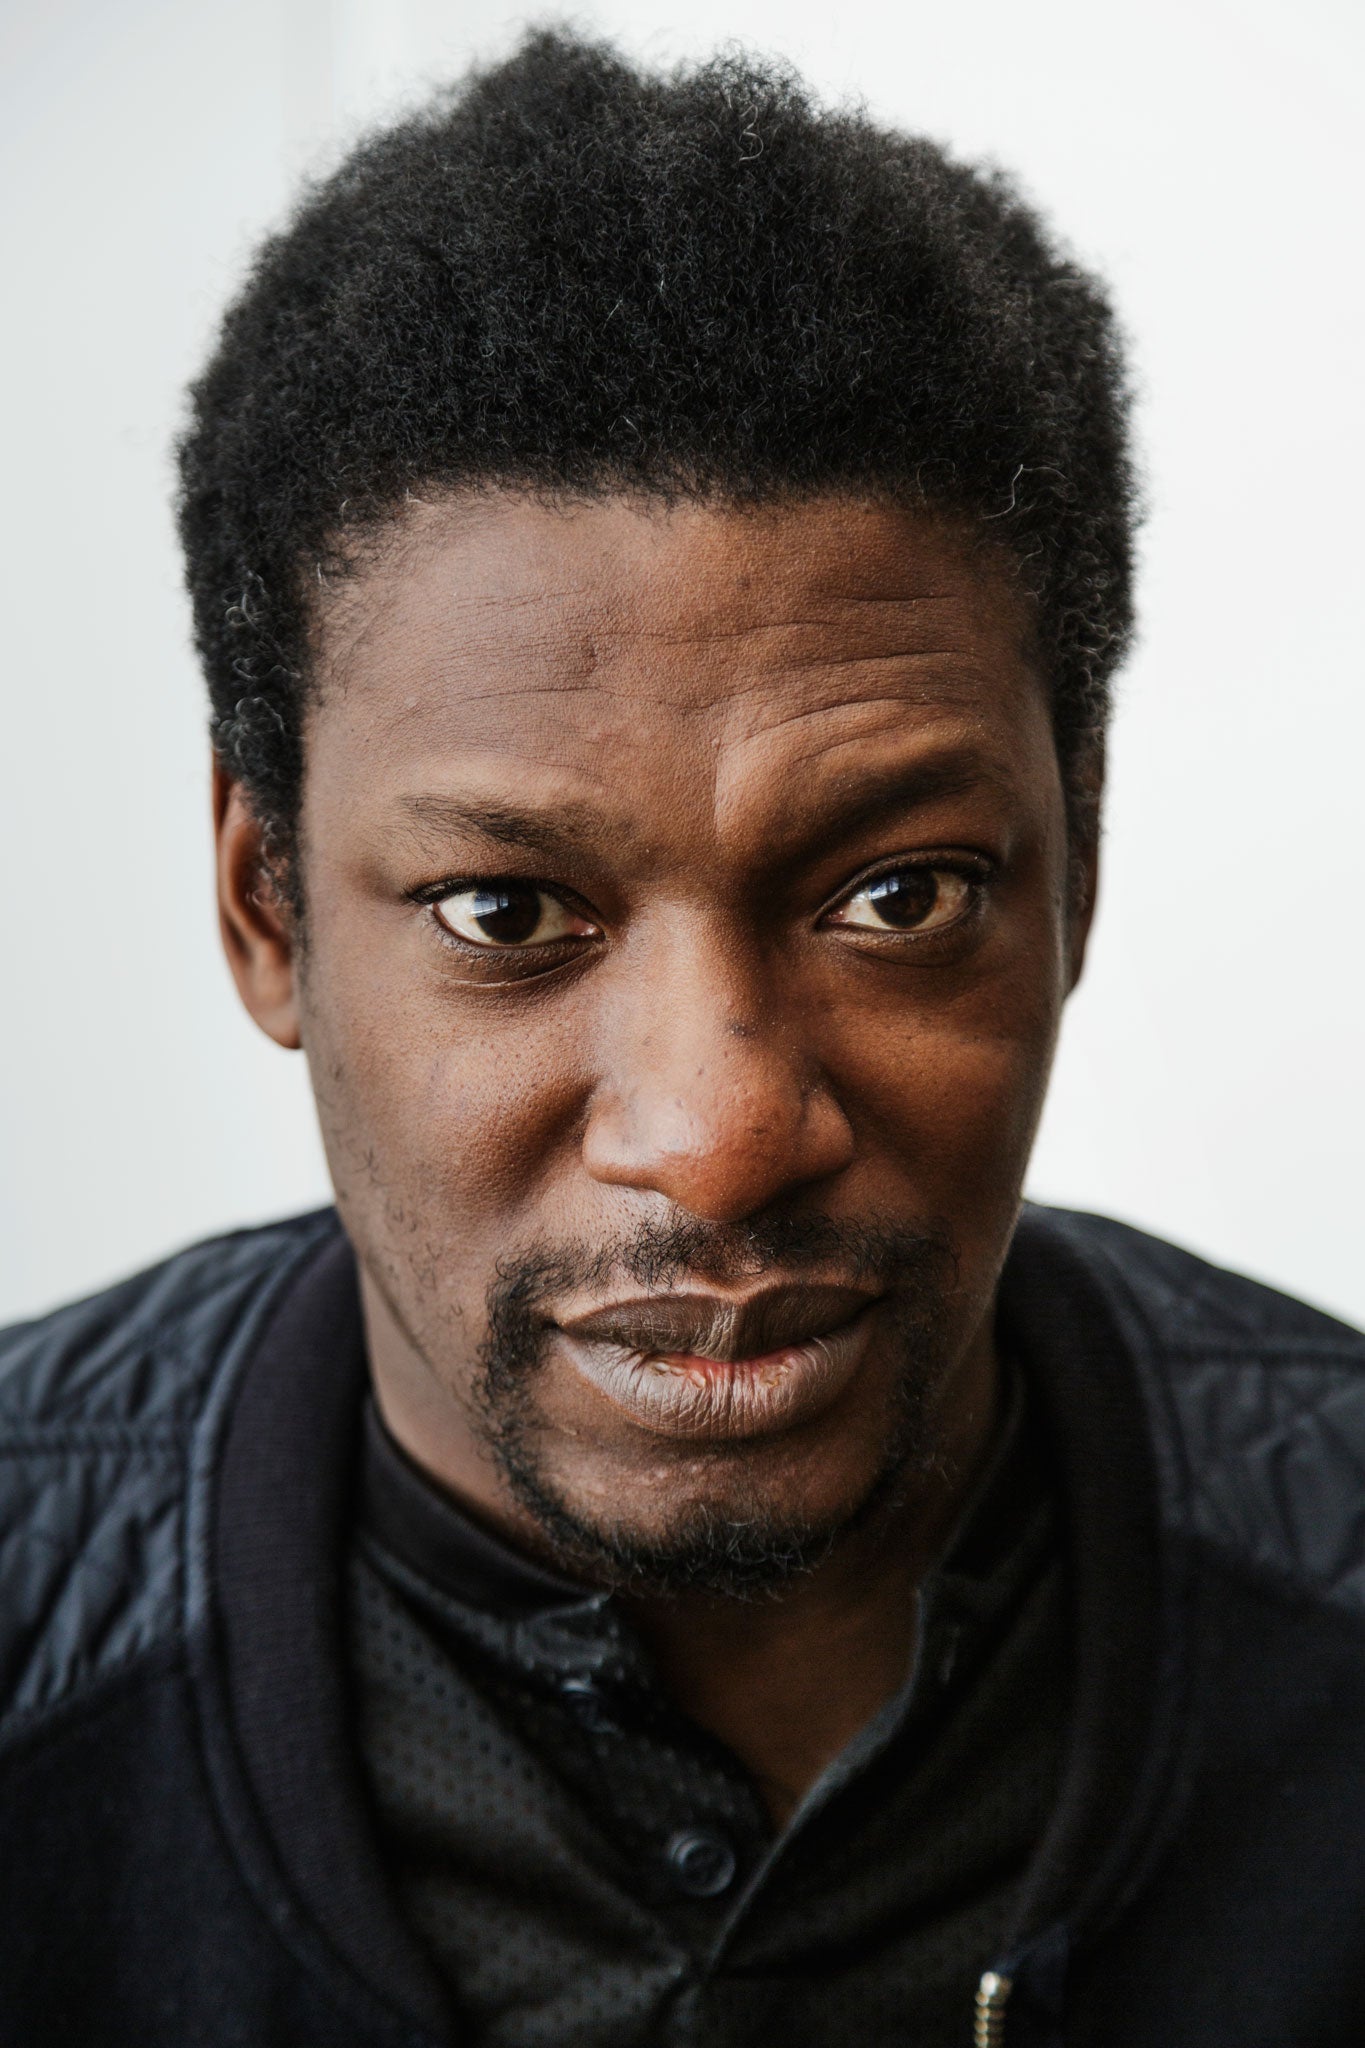 Manuva has won much critical acclaim for his five studio albums yet mainstream success has remained elusive